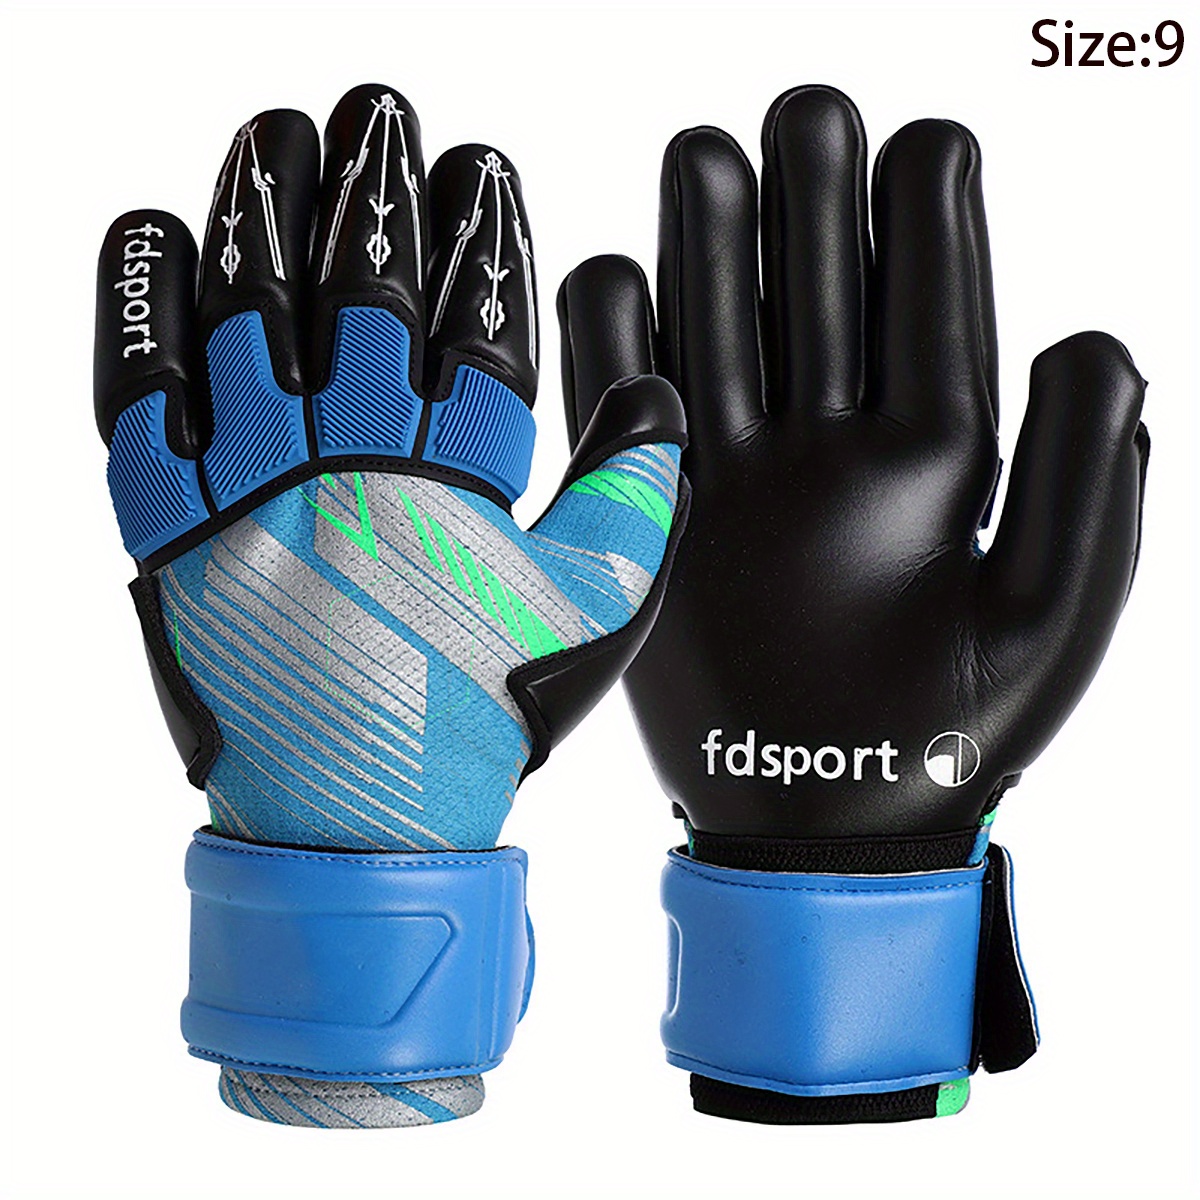  Sportout Youth&Adult Goalie Goalkeeper Gloves,Strong Grip for  The Toughest Saves, with Finger Spines to Give Splendid Protection to  Prevent Injuries,3 Colors (Black, 5) : Sports & Outdoors